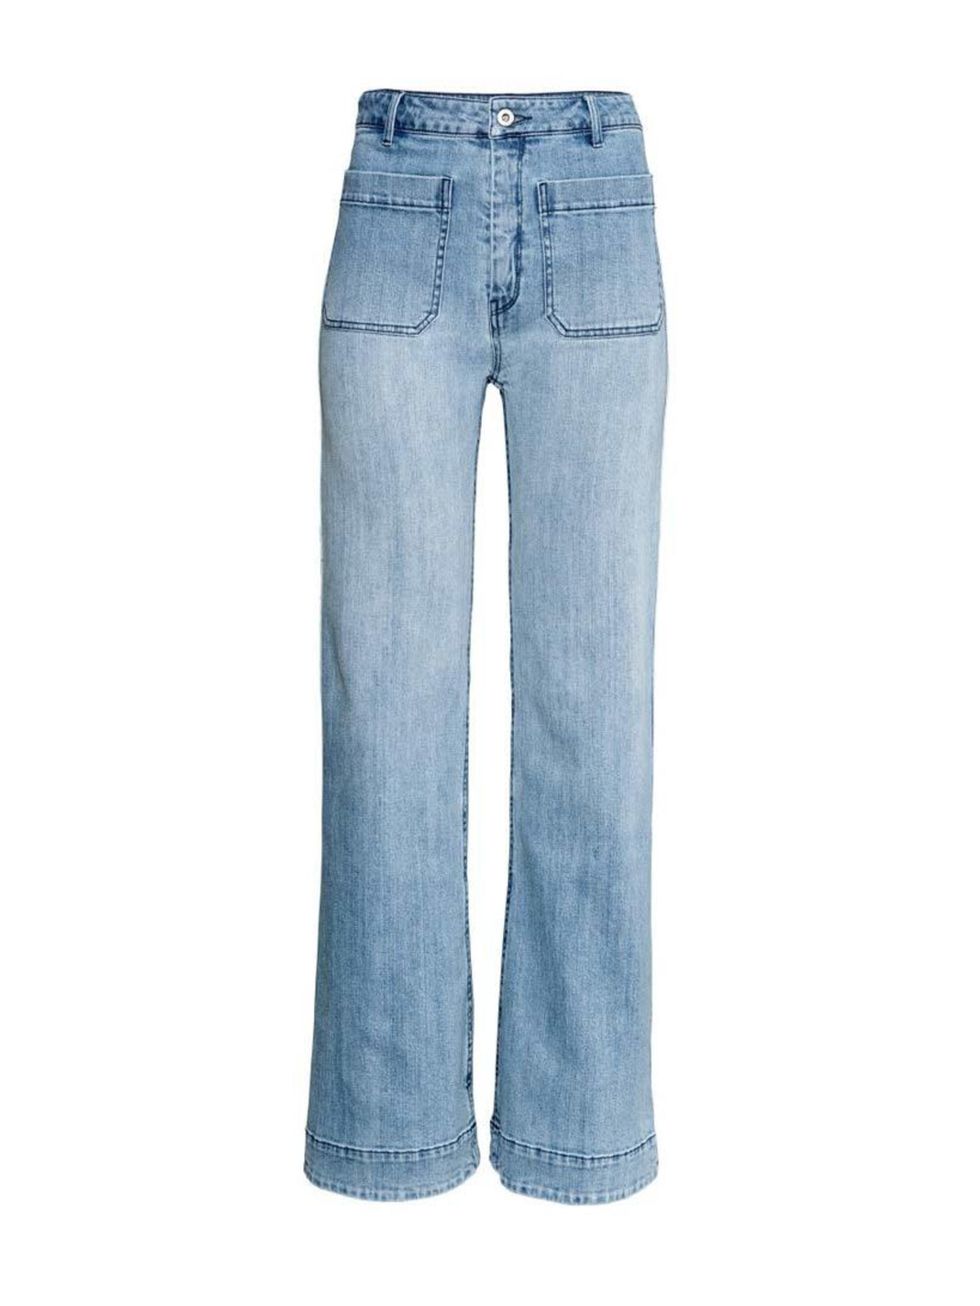 <p><a href="http://www.hm.com/gb/product/88969?article=88969-B" target="_blank">H&M</a> jeans, £24.99</p>